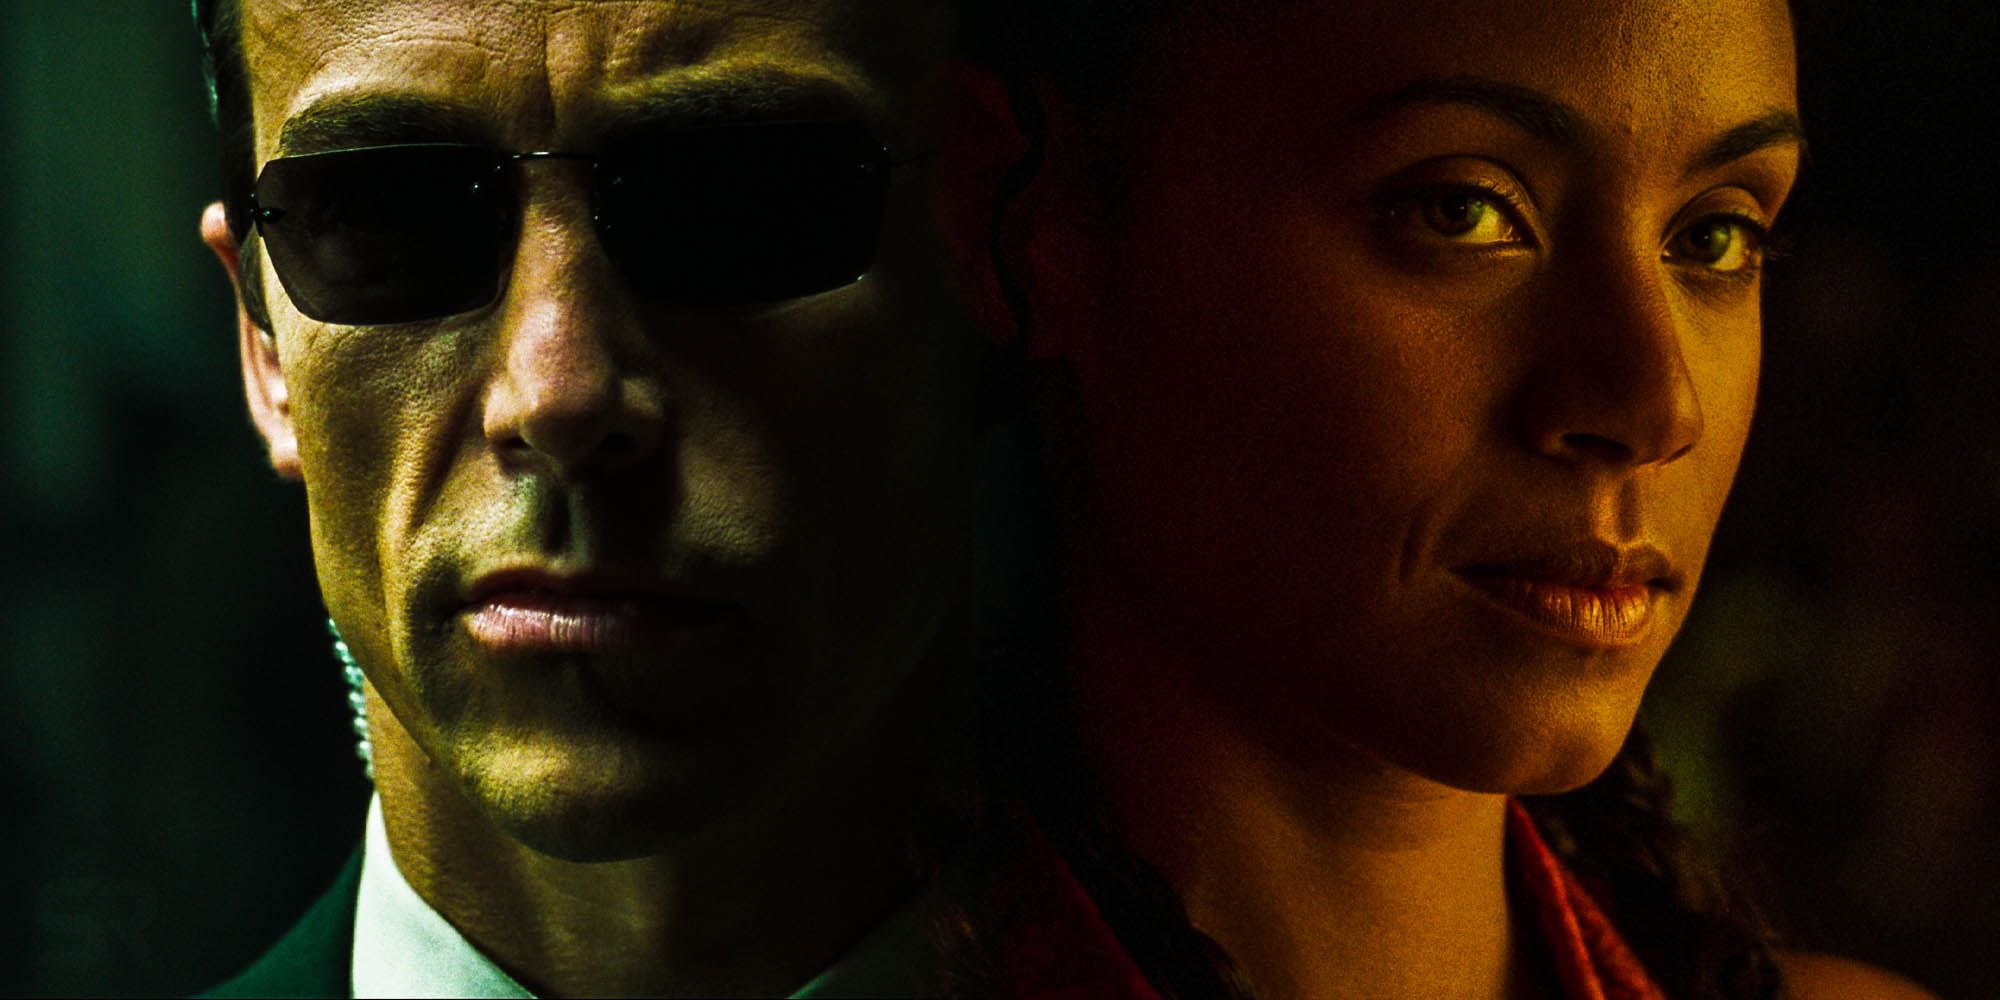 The matrix 4 returning characters not in trailer Naomi Agent Johnson